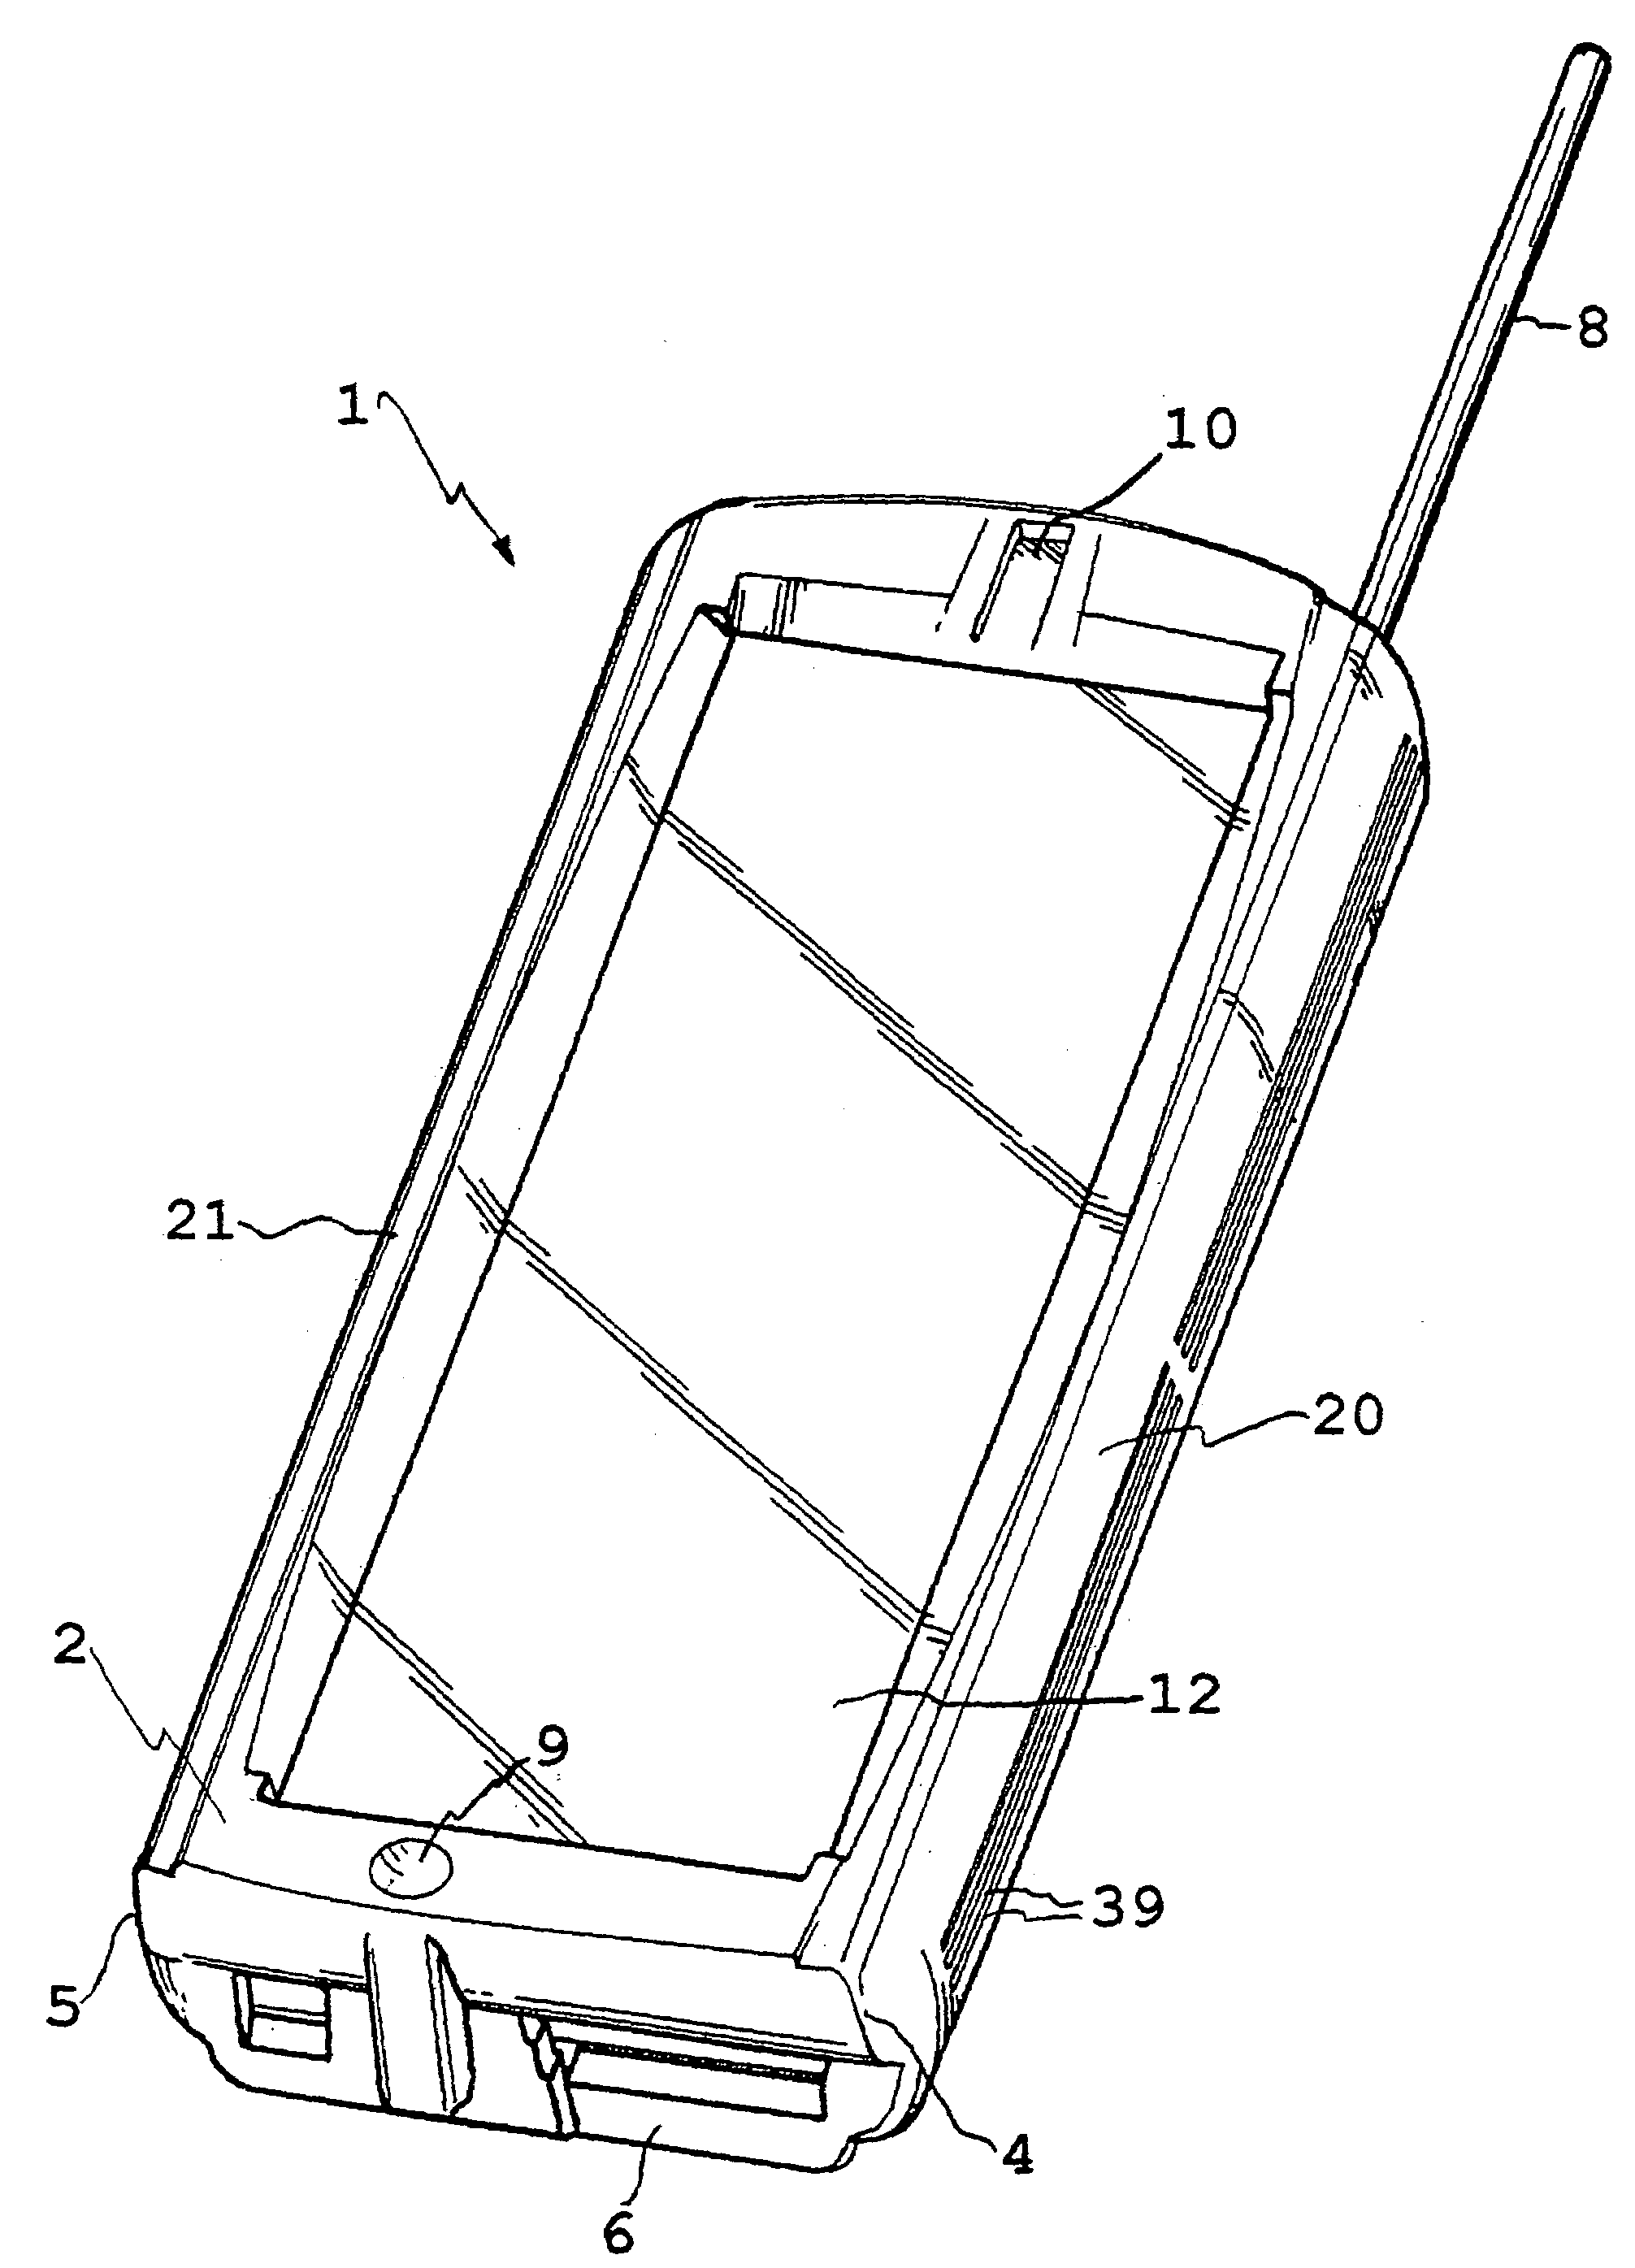 Handheld or pocketsized electronic apparatus and hand-controlled input device